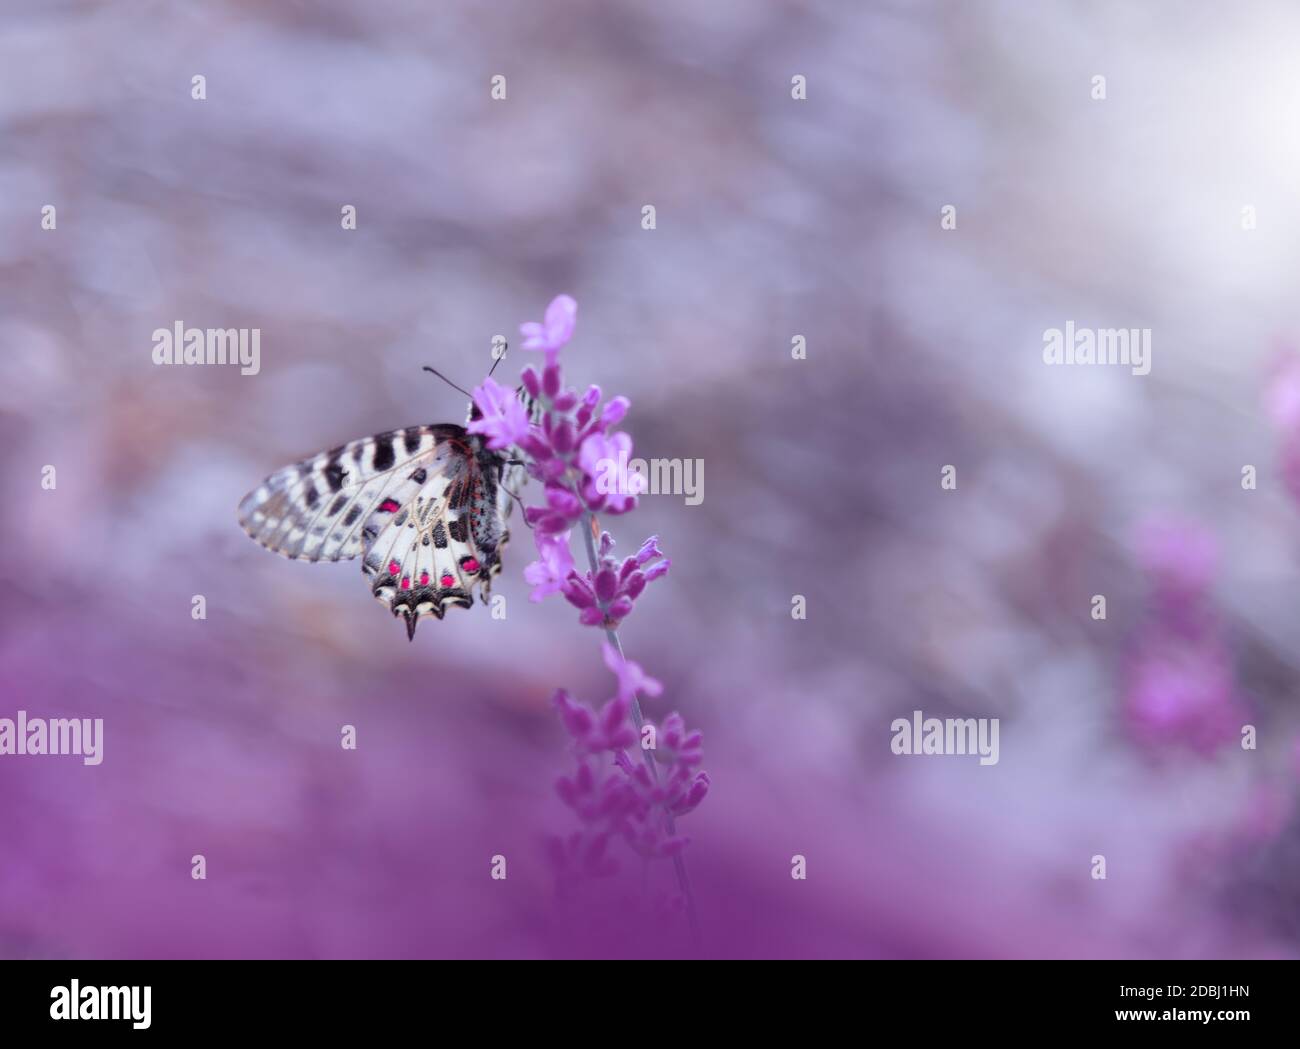 Beautiful Violet Nature Background.Floral Art Design.Macro Photography.Floral abstract pastel background with copy space.Butterfly and Lavender Field.Butterfly in Summer Floral Background.Beautiful Butterfly on a Flower.Creative Artistic Wallpaper. Stock Photo